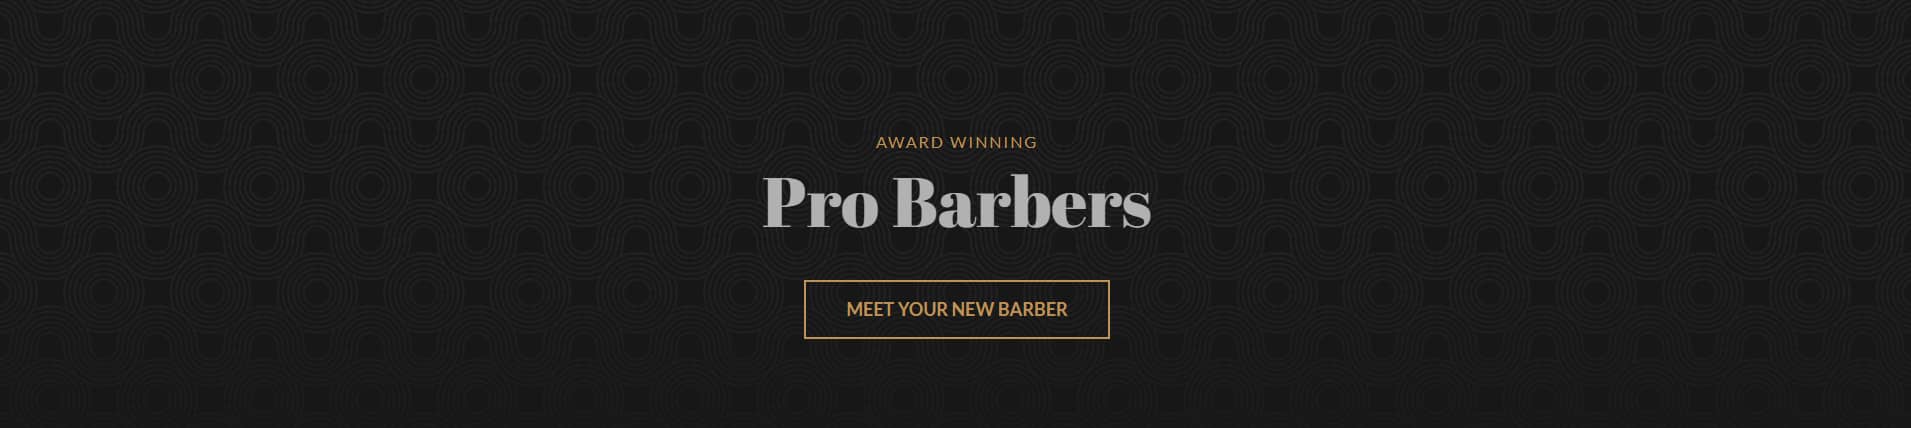 Avada Barbers Introduction